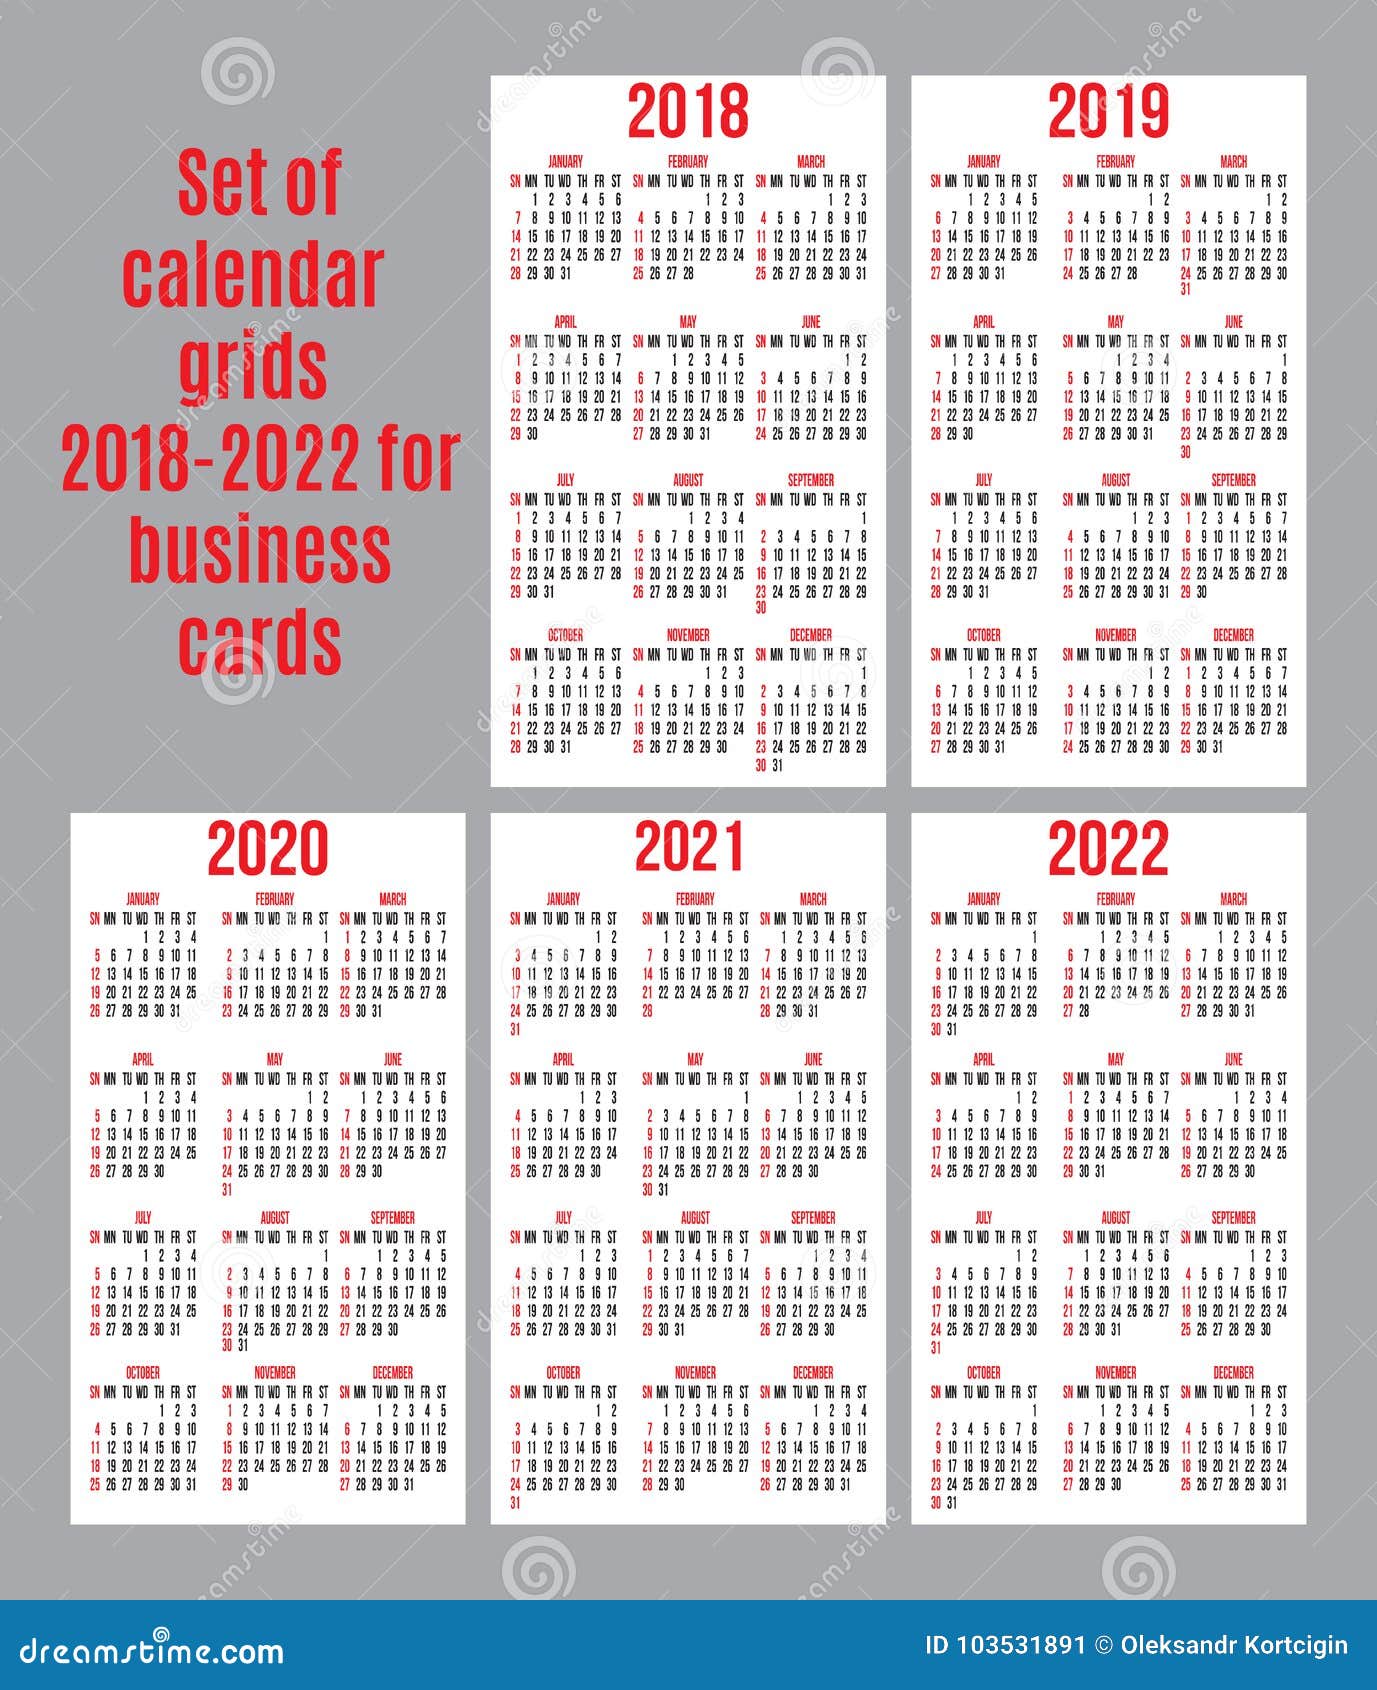 Vector Set of Calendar Grid for Years 2018-2022 for Business Cards on ...